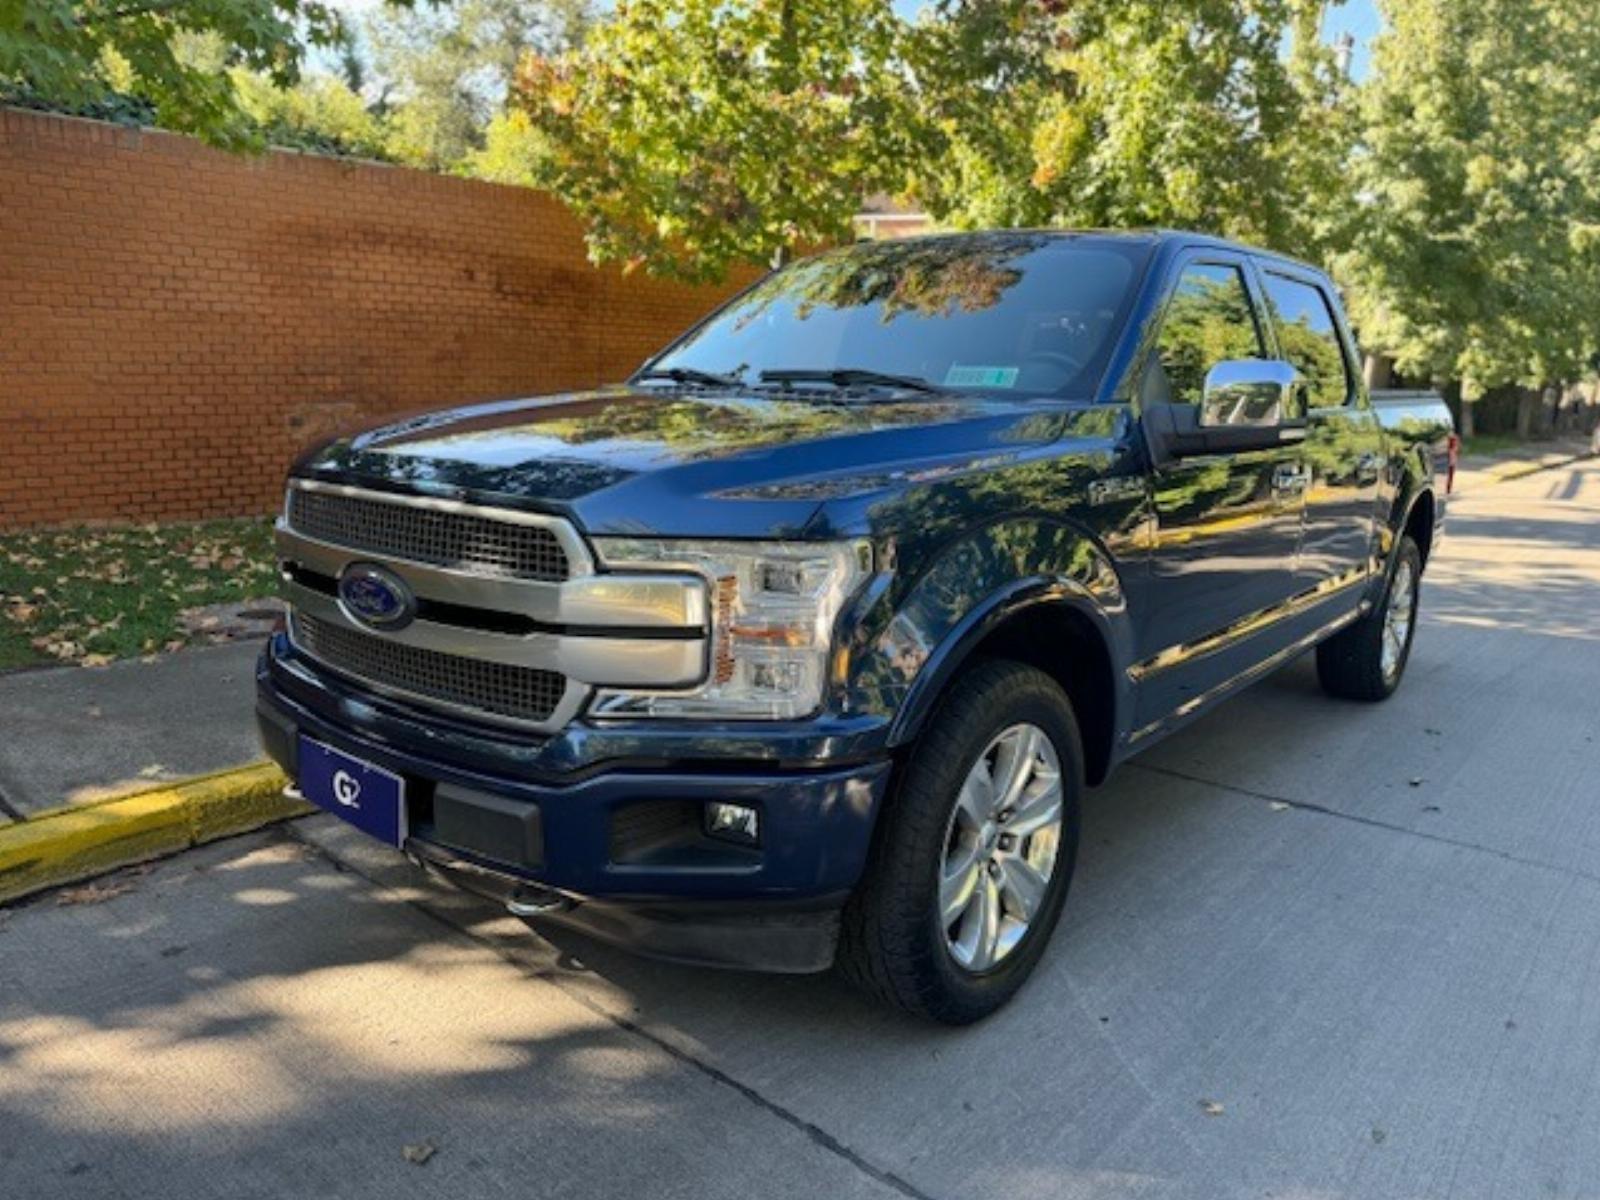 FORD F-150 LIMITED 3.5 Ecoboost 4WD 2018 Facturable - G2 AUTOMOVILES